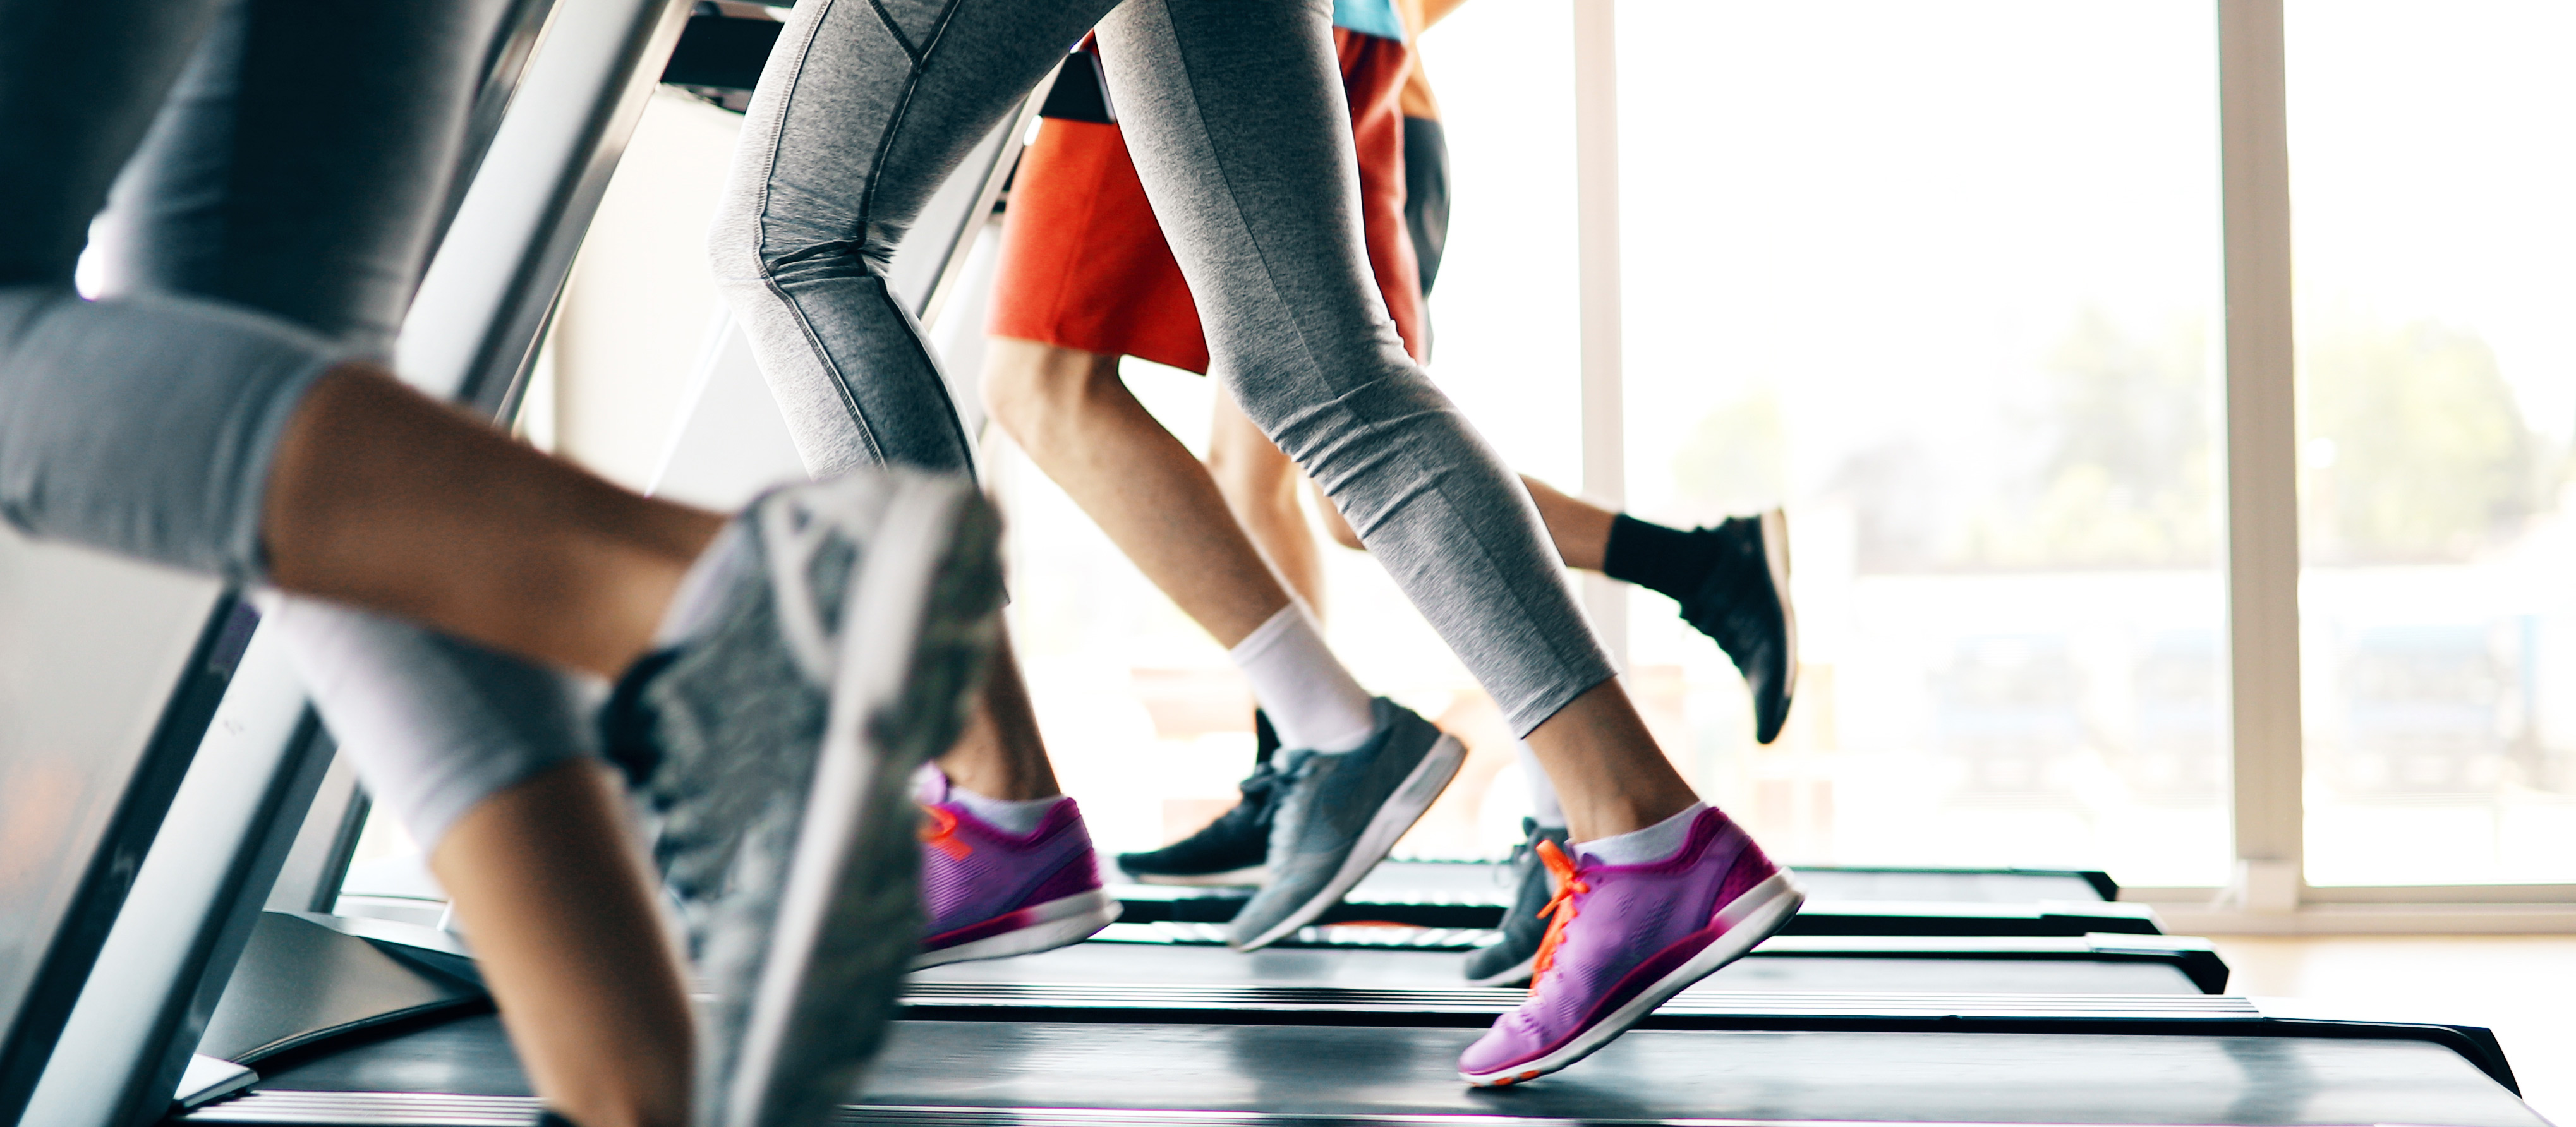 Are You Making These 6 Treadmill Mistakes?